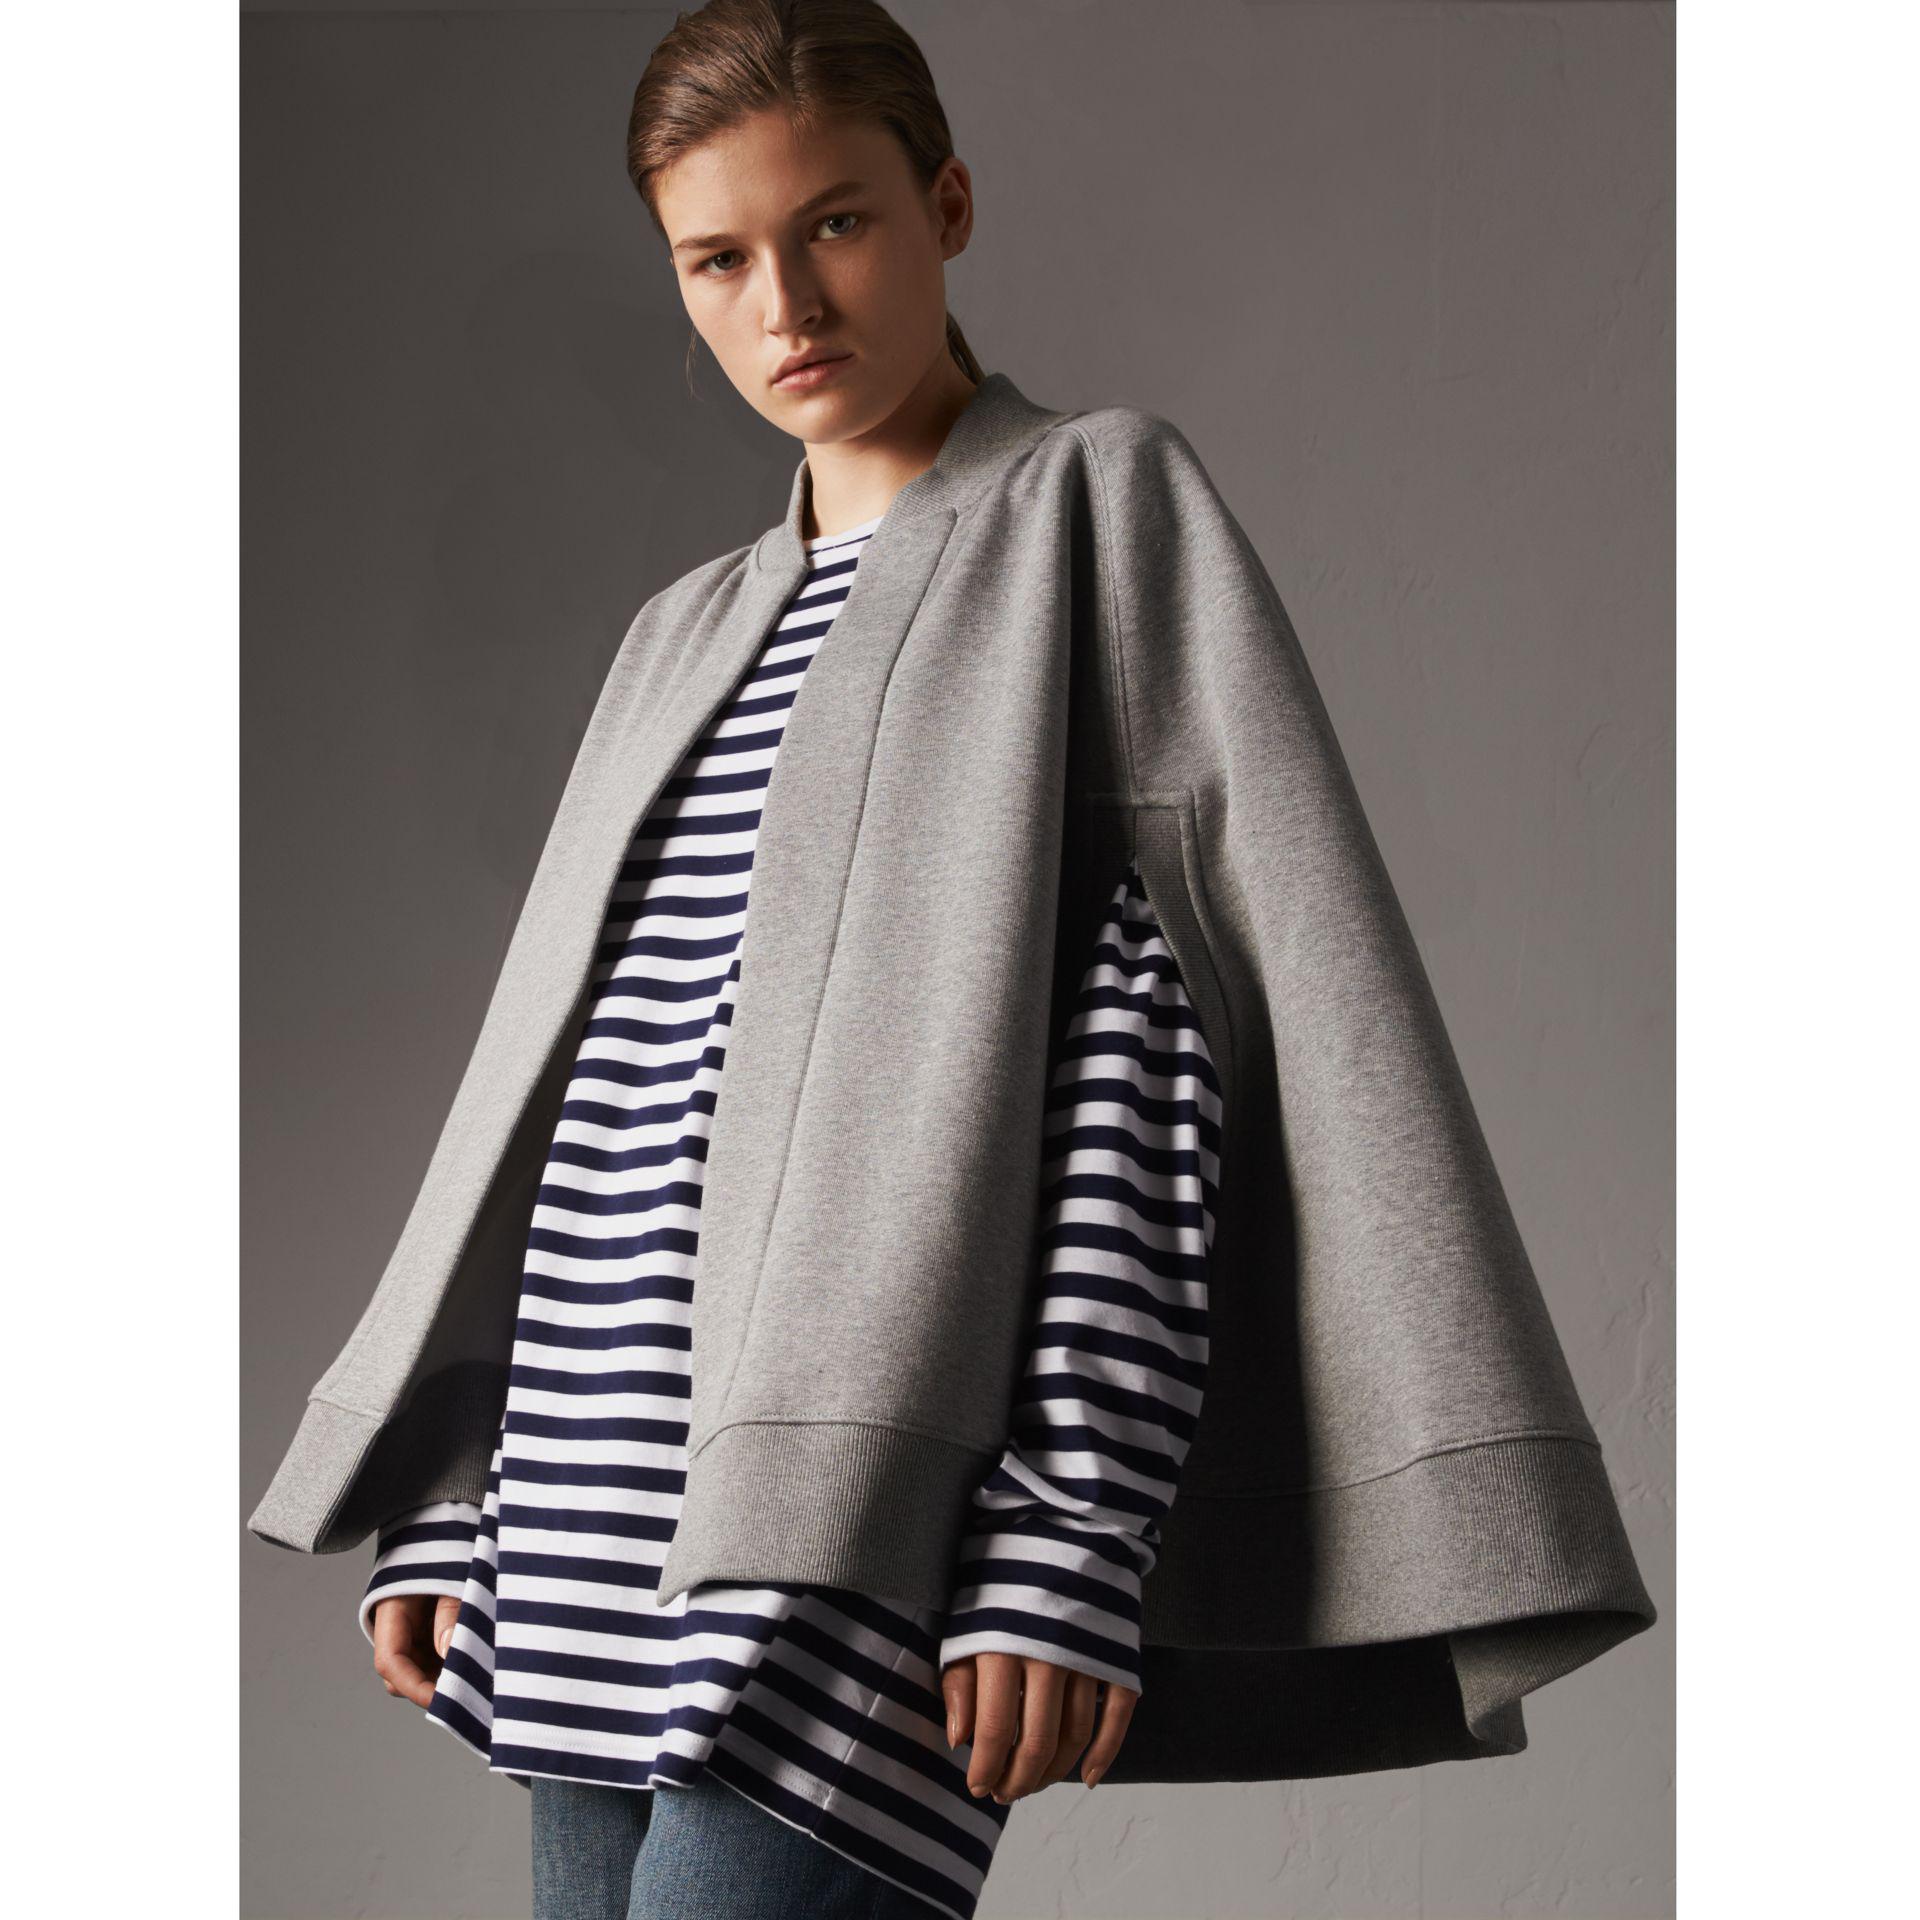 Burberry Denim Embroidered Jersey Cape 